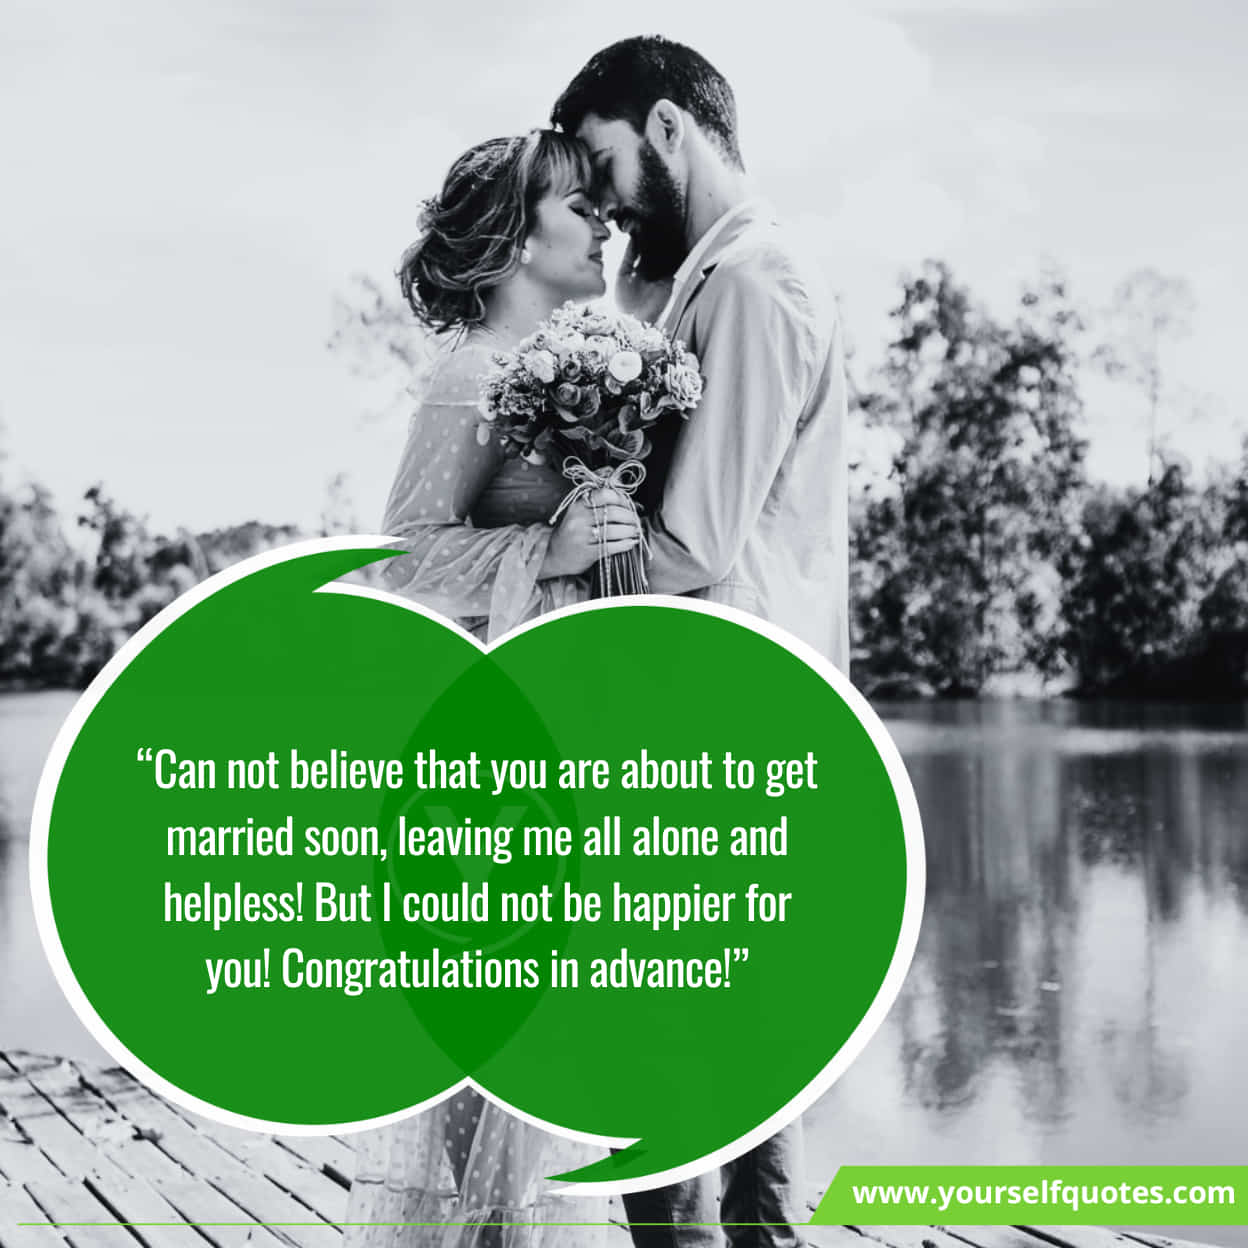 Inspirational Advance Messages For Wedding